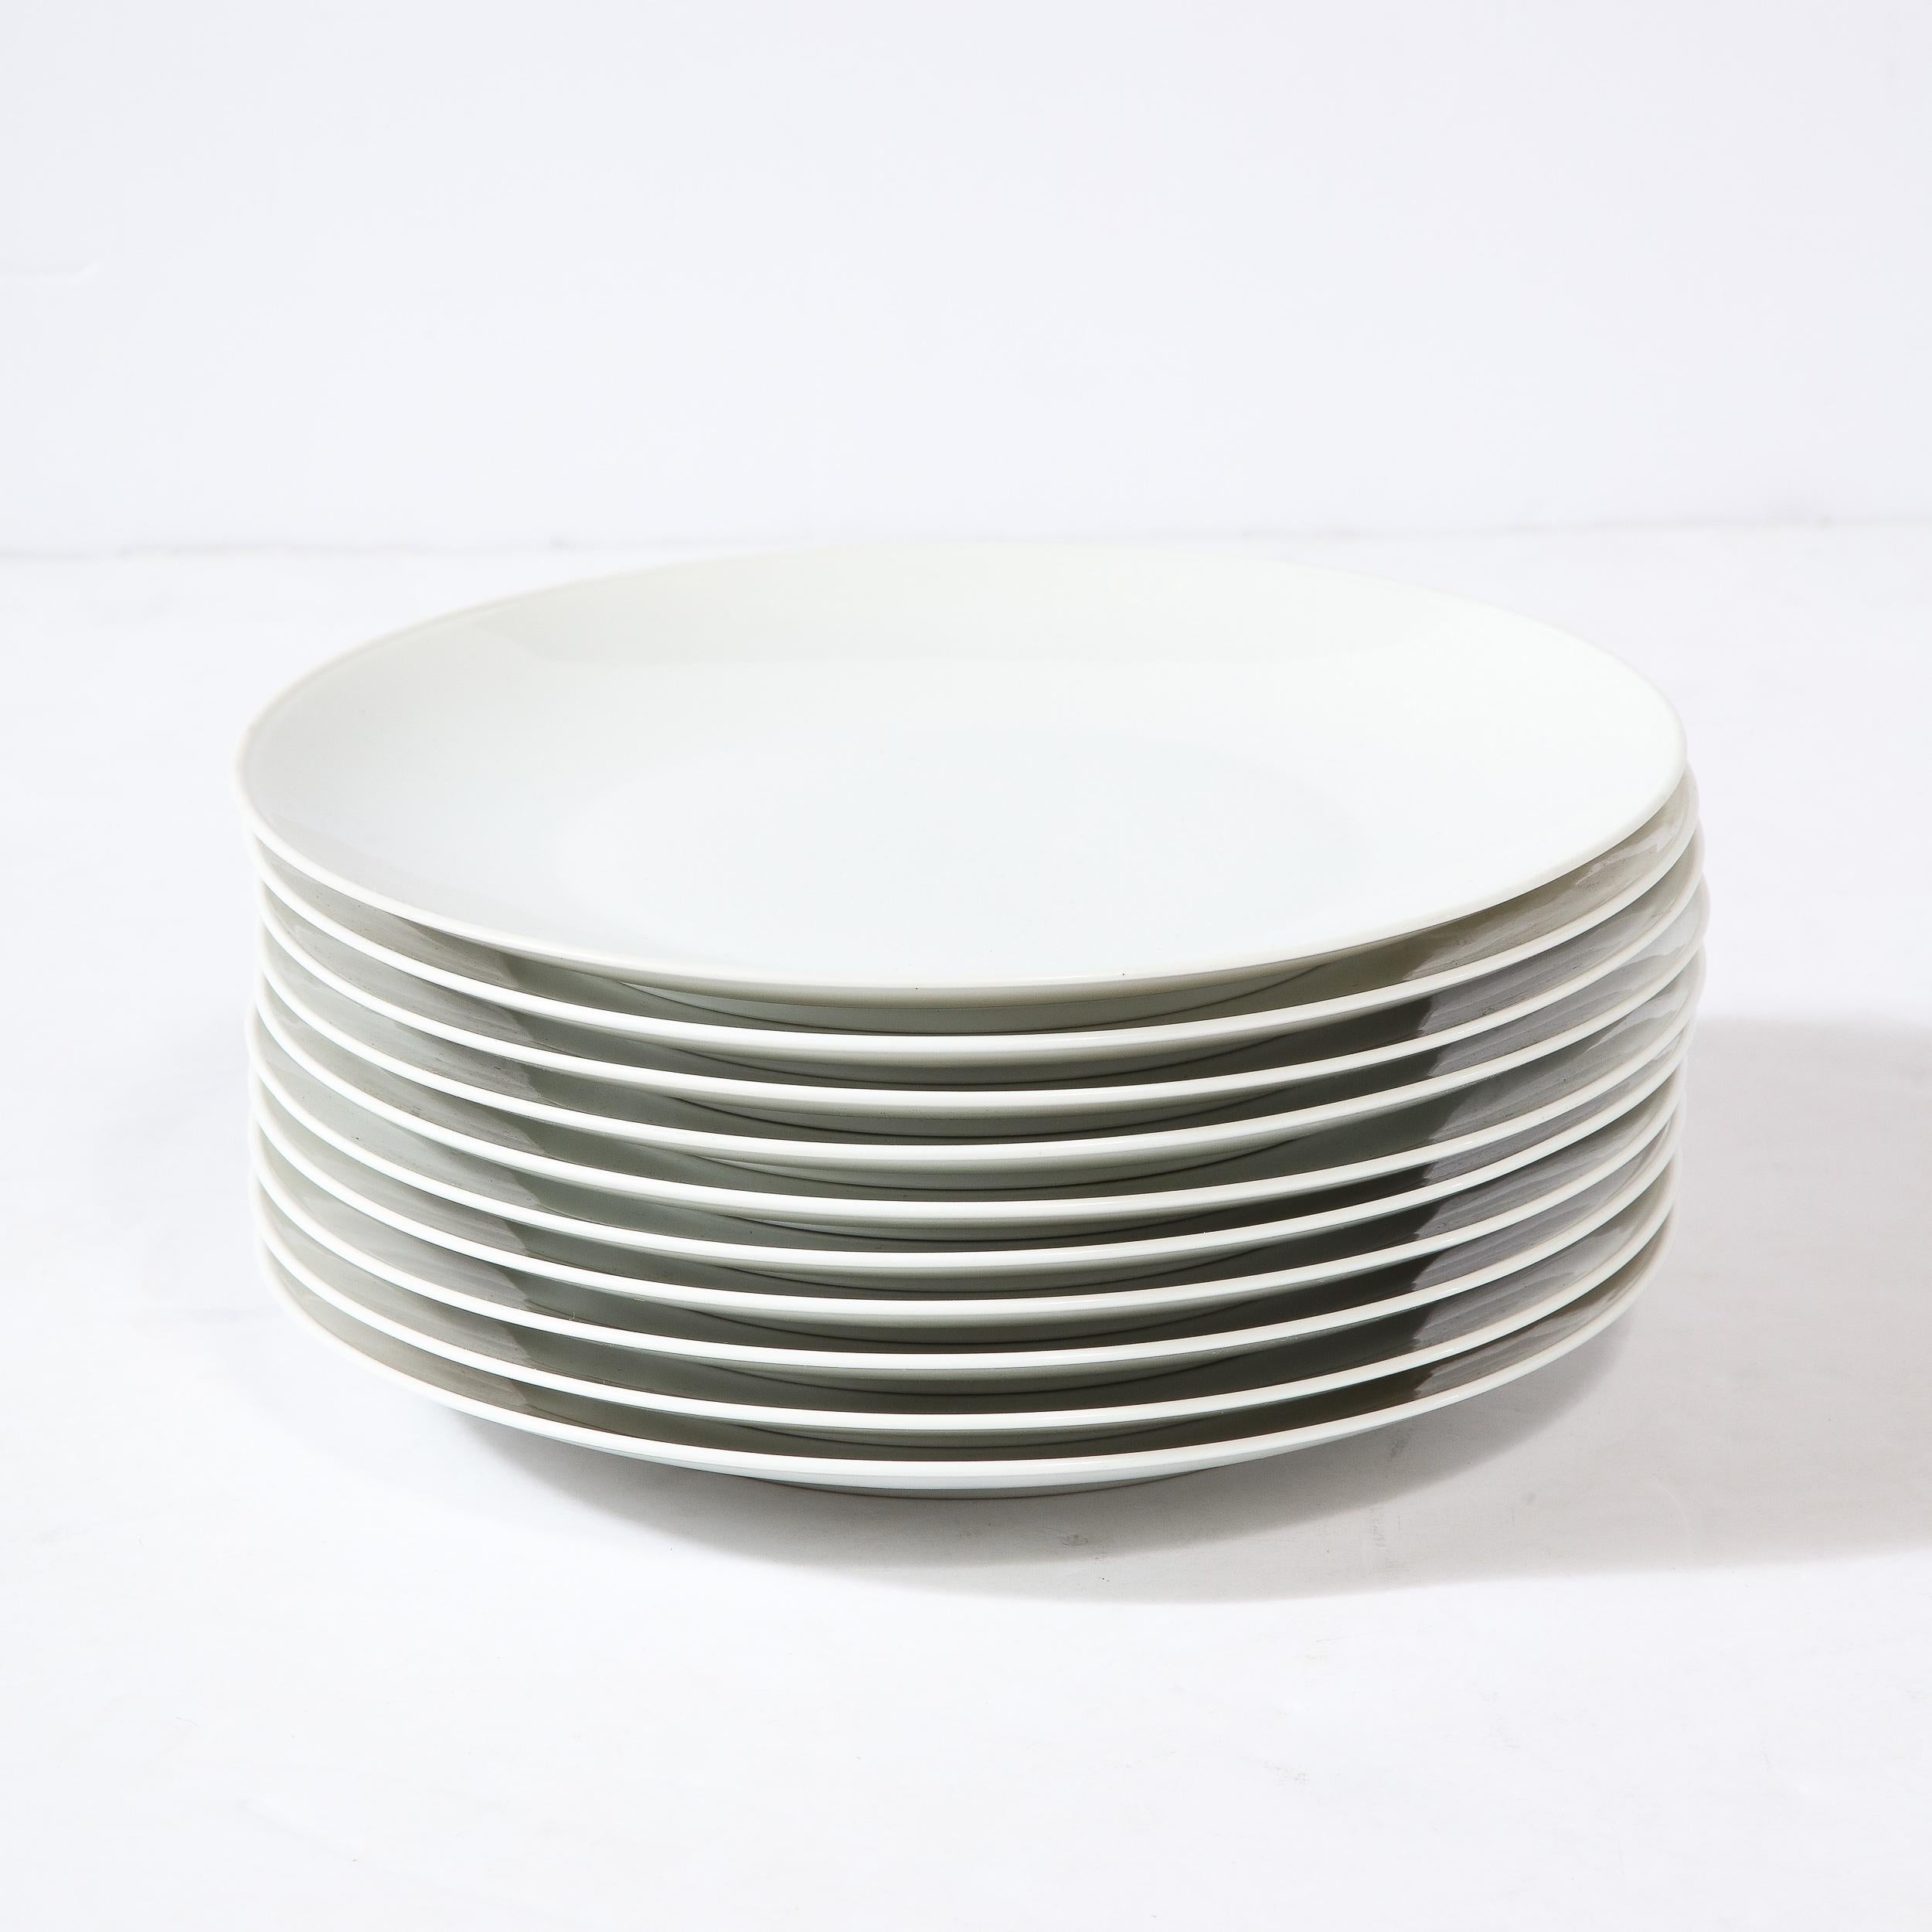 This lovely set of Eight Porcelain Dinner Plates is by the esteemed manufacturer Rosenthal and originates from Germany circa 1960 . Featuring a round profile with gradual slanted edge leading to the center of each piece, these are highly minimal and